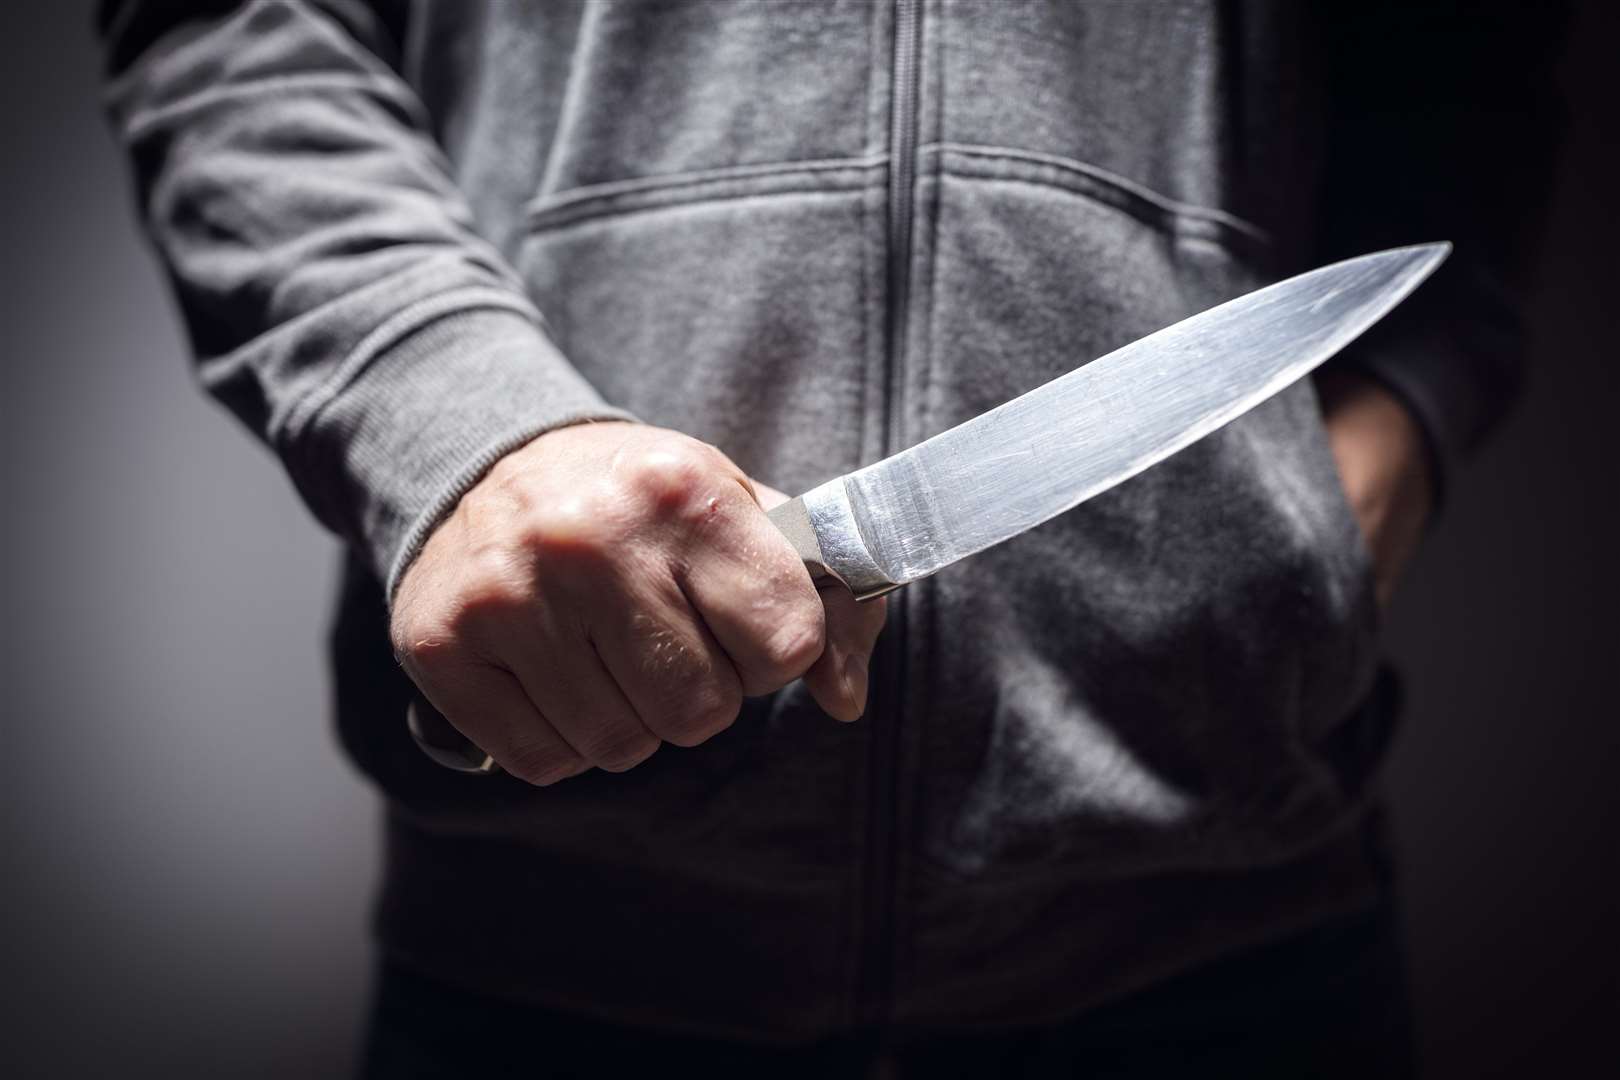 One victim was stabbed and another hit by a car. Picture: iStock